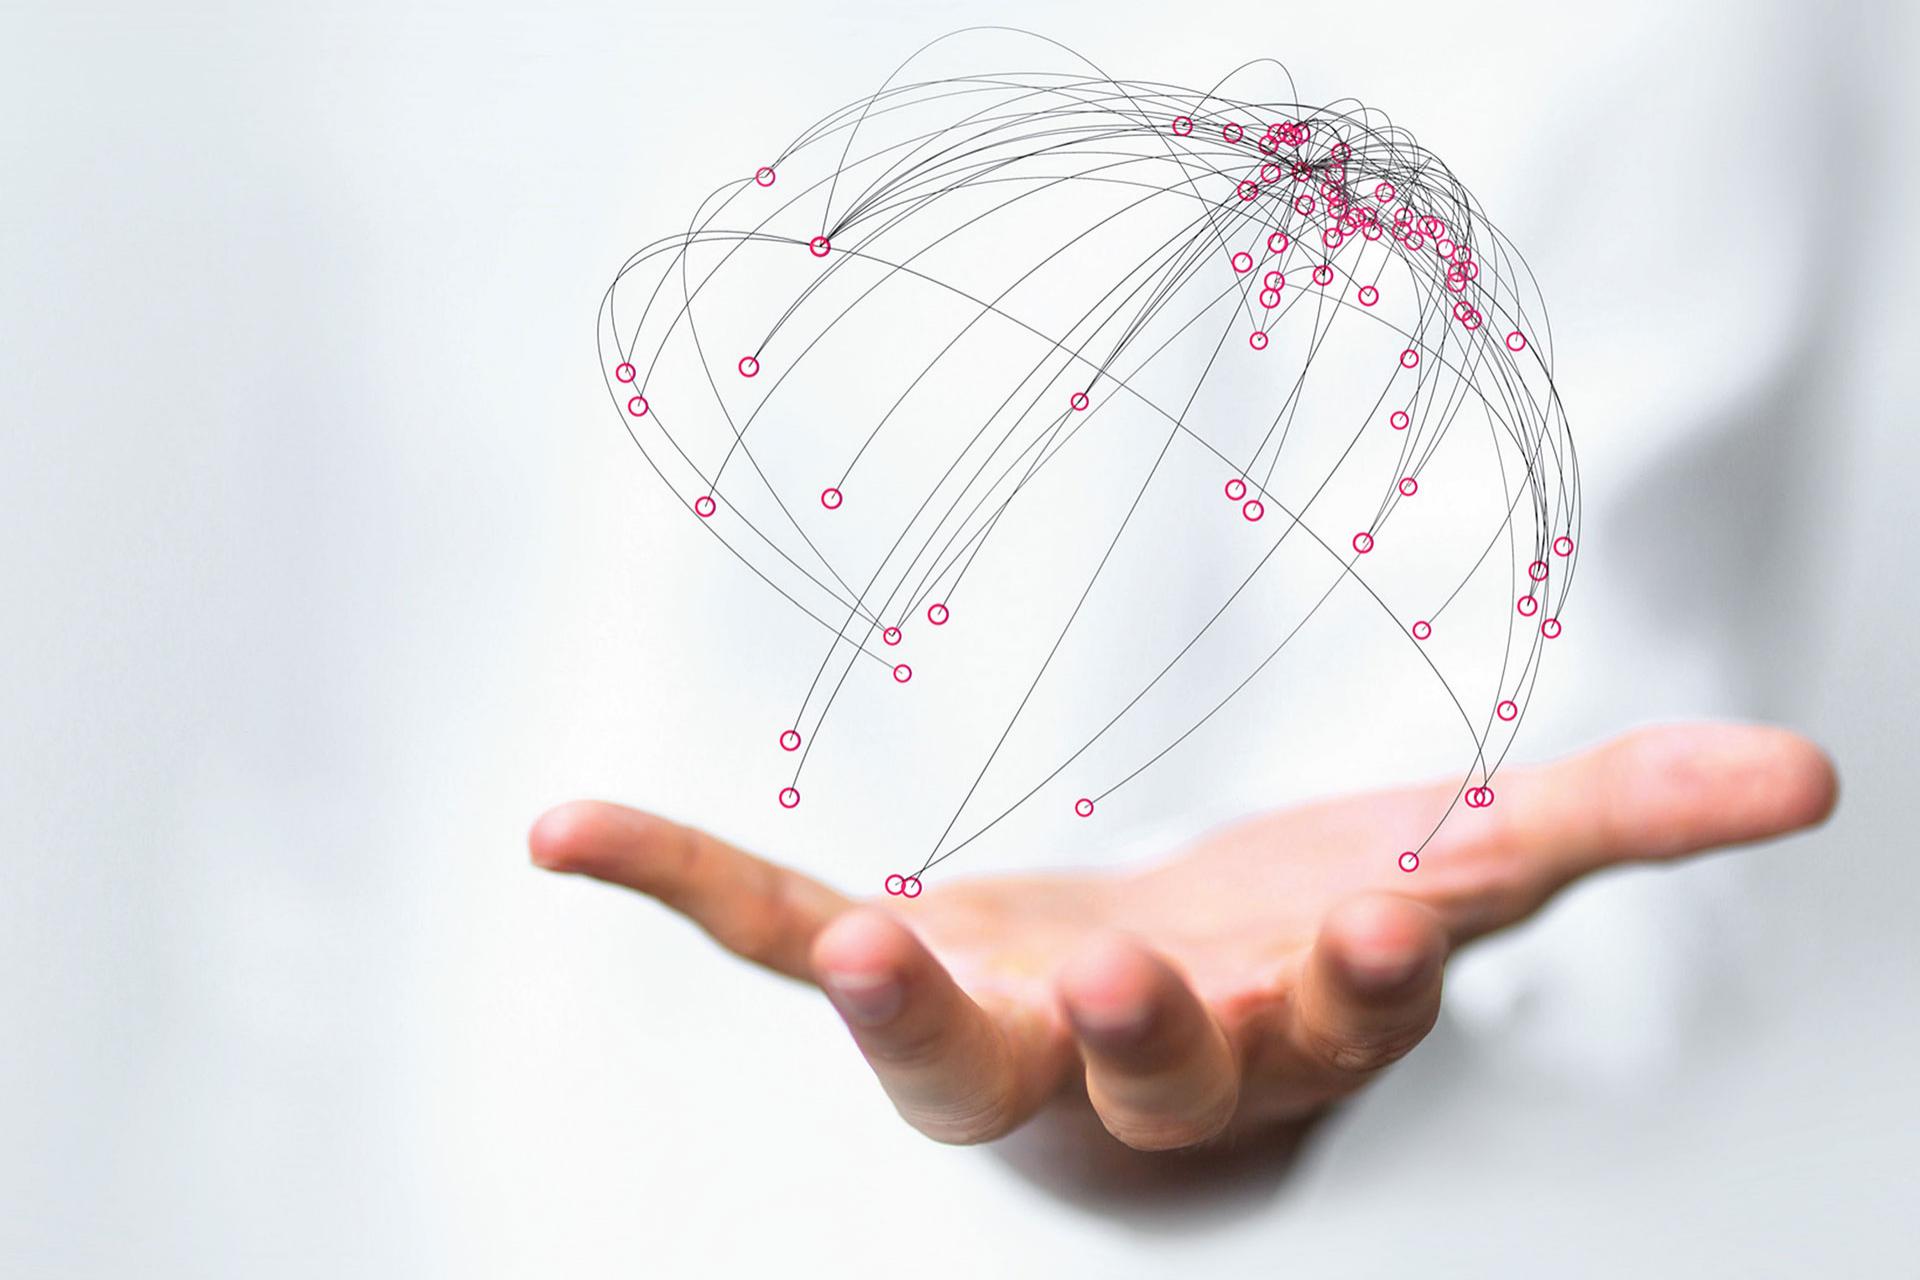 Connection around the world and between networks and production illustrated by connected dots forming a globe, hovering over a mans hand